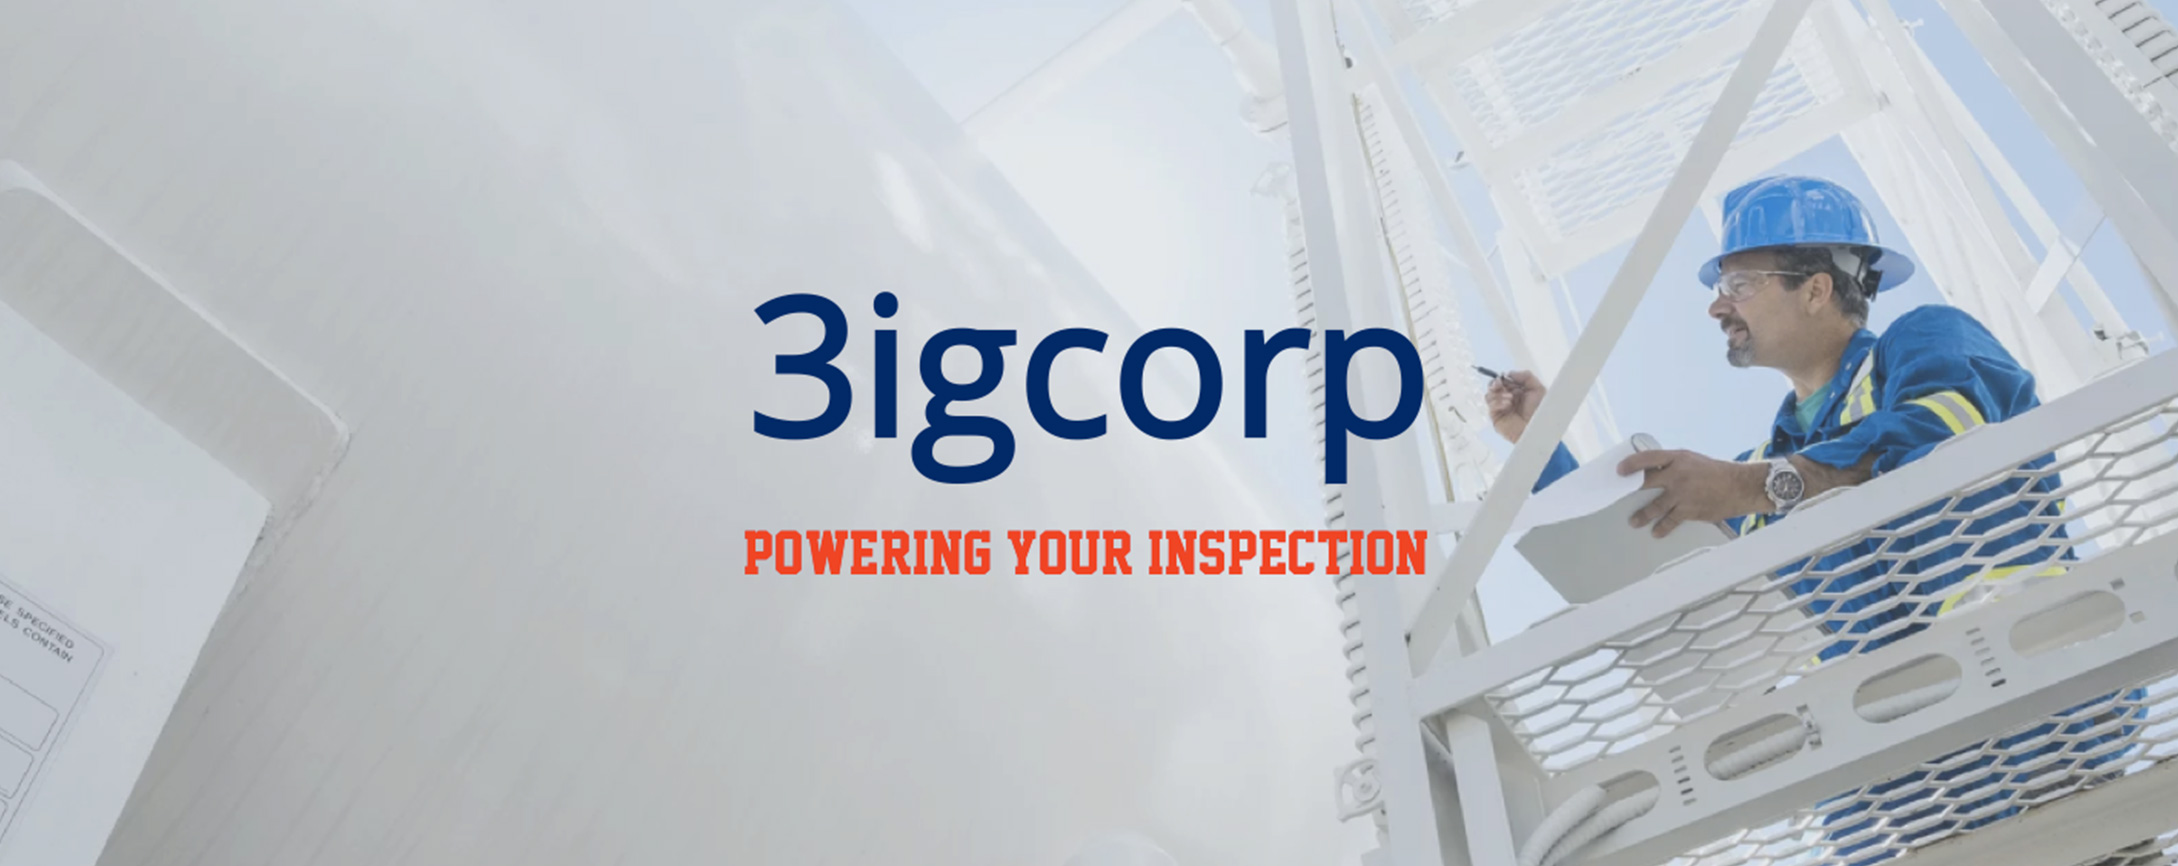 3igcorp - Powering your inspection